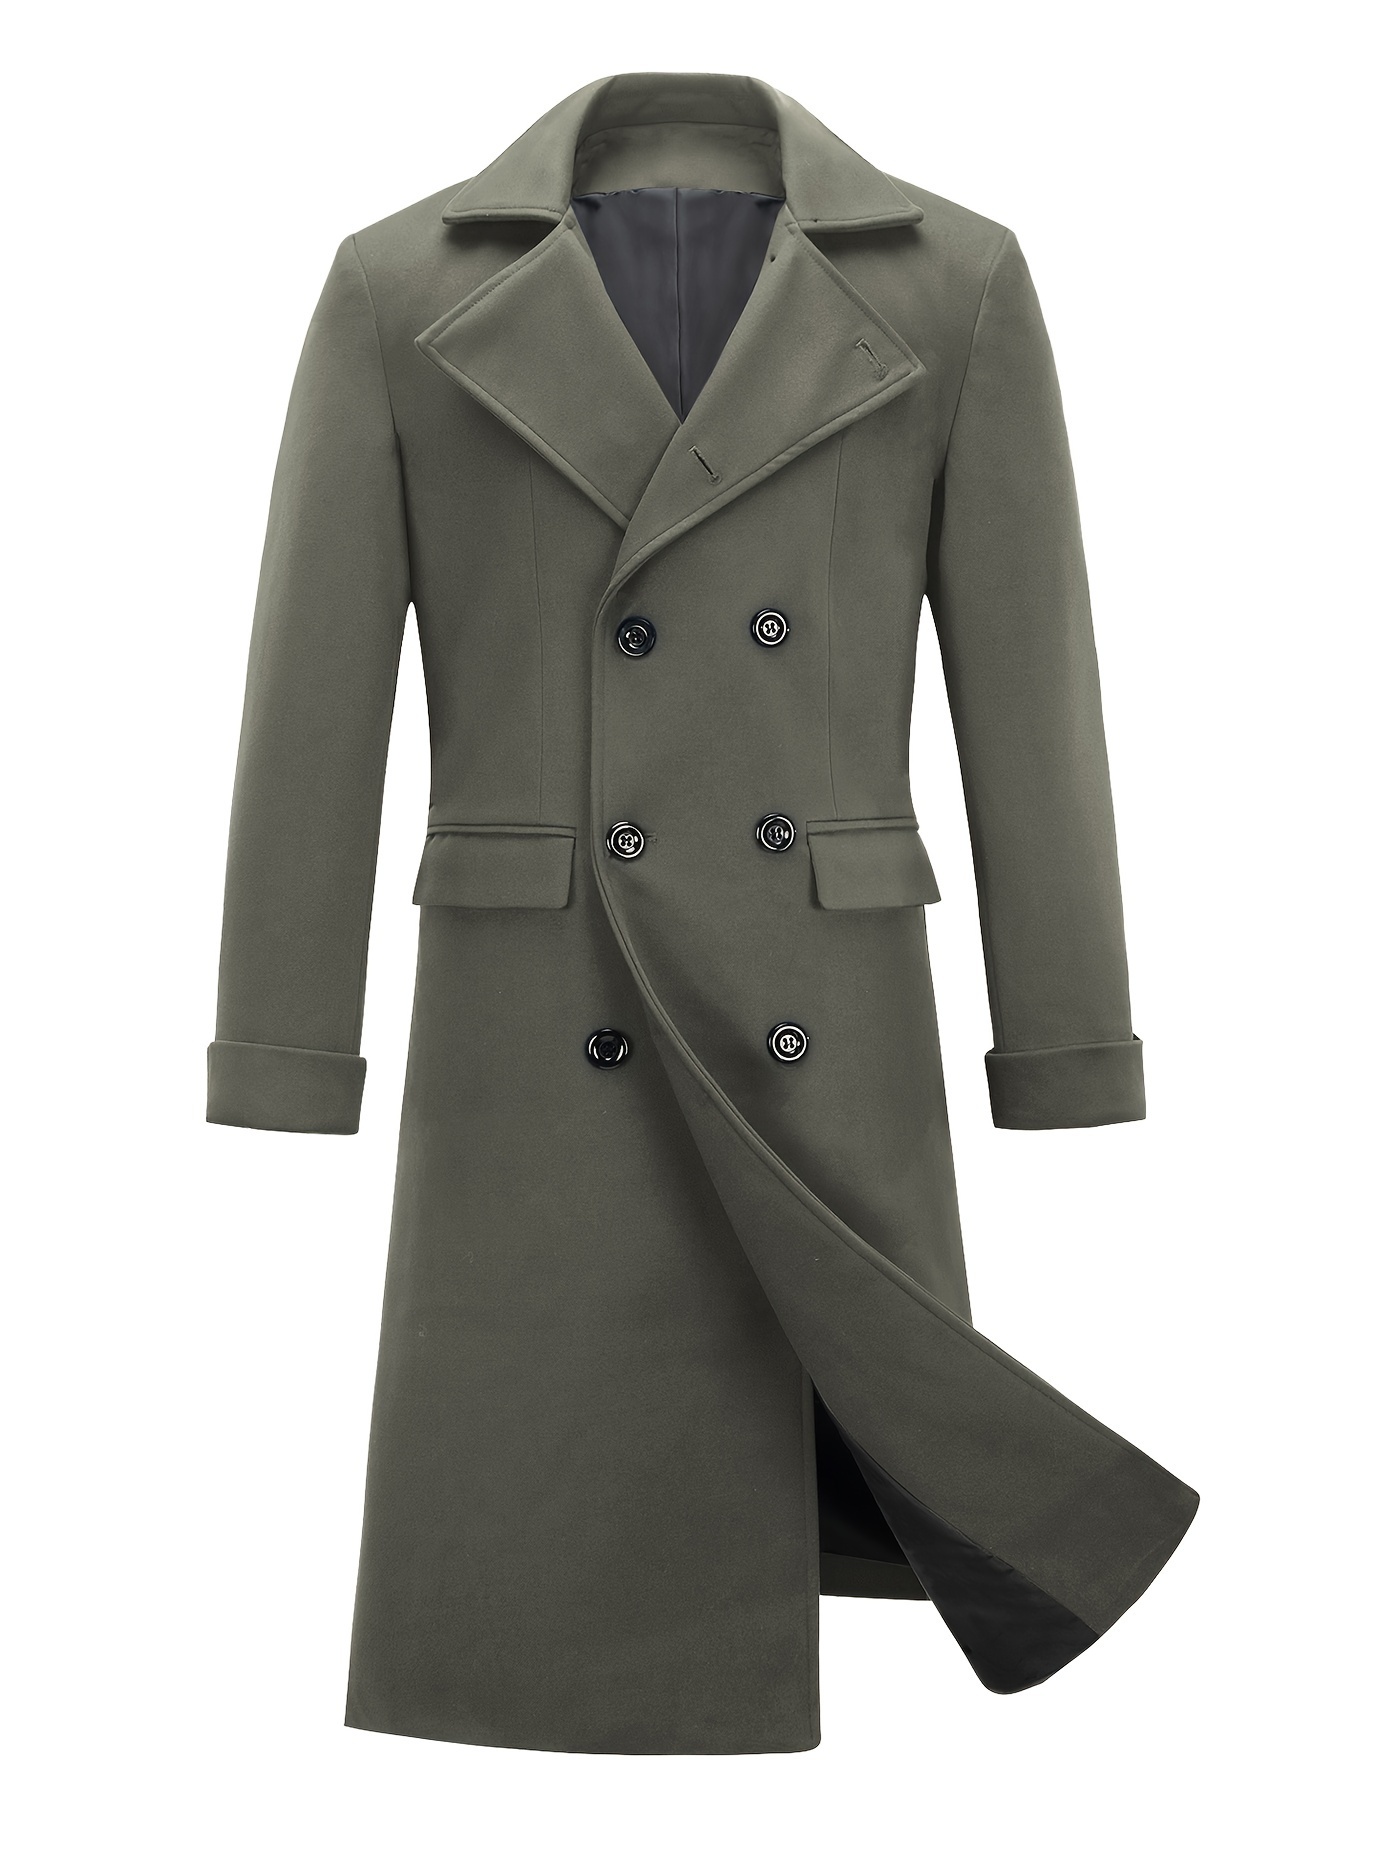 mens notch lapel double breasted long trench coat casual windproof overcoat details 5